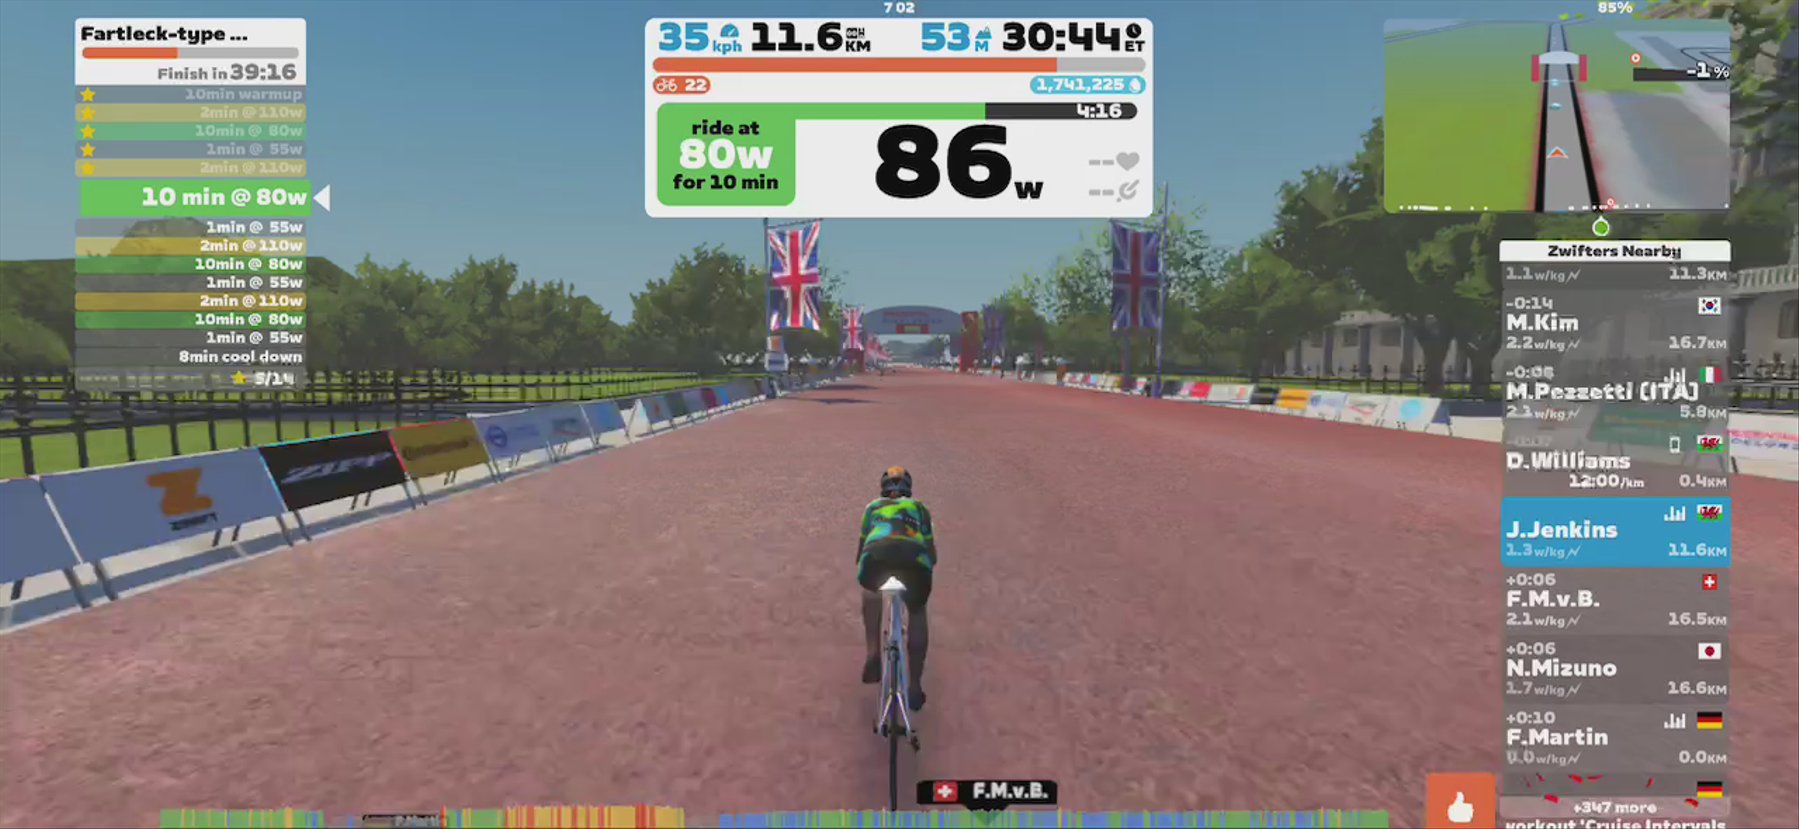 Zwift - Fartleck-type session in London